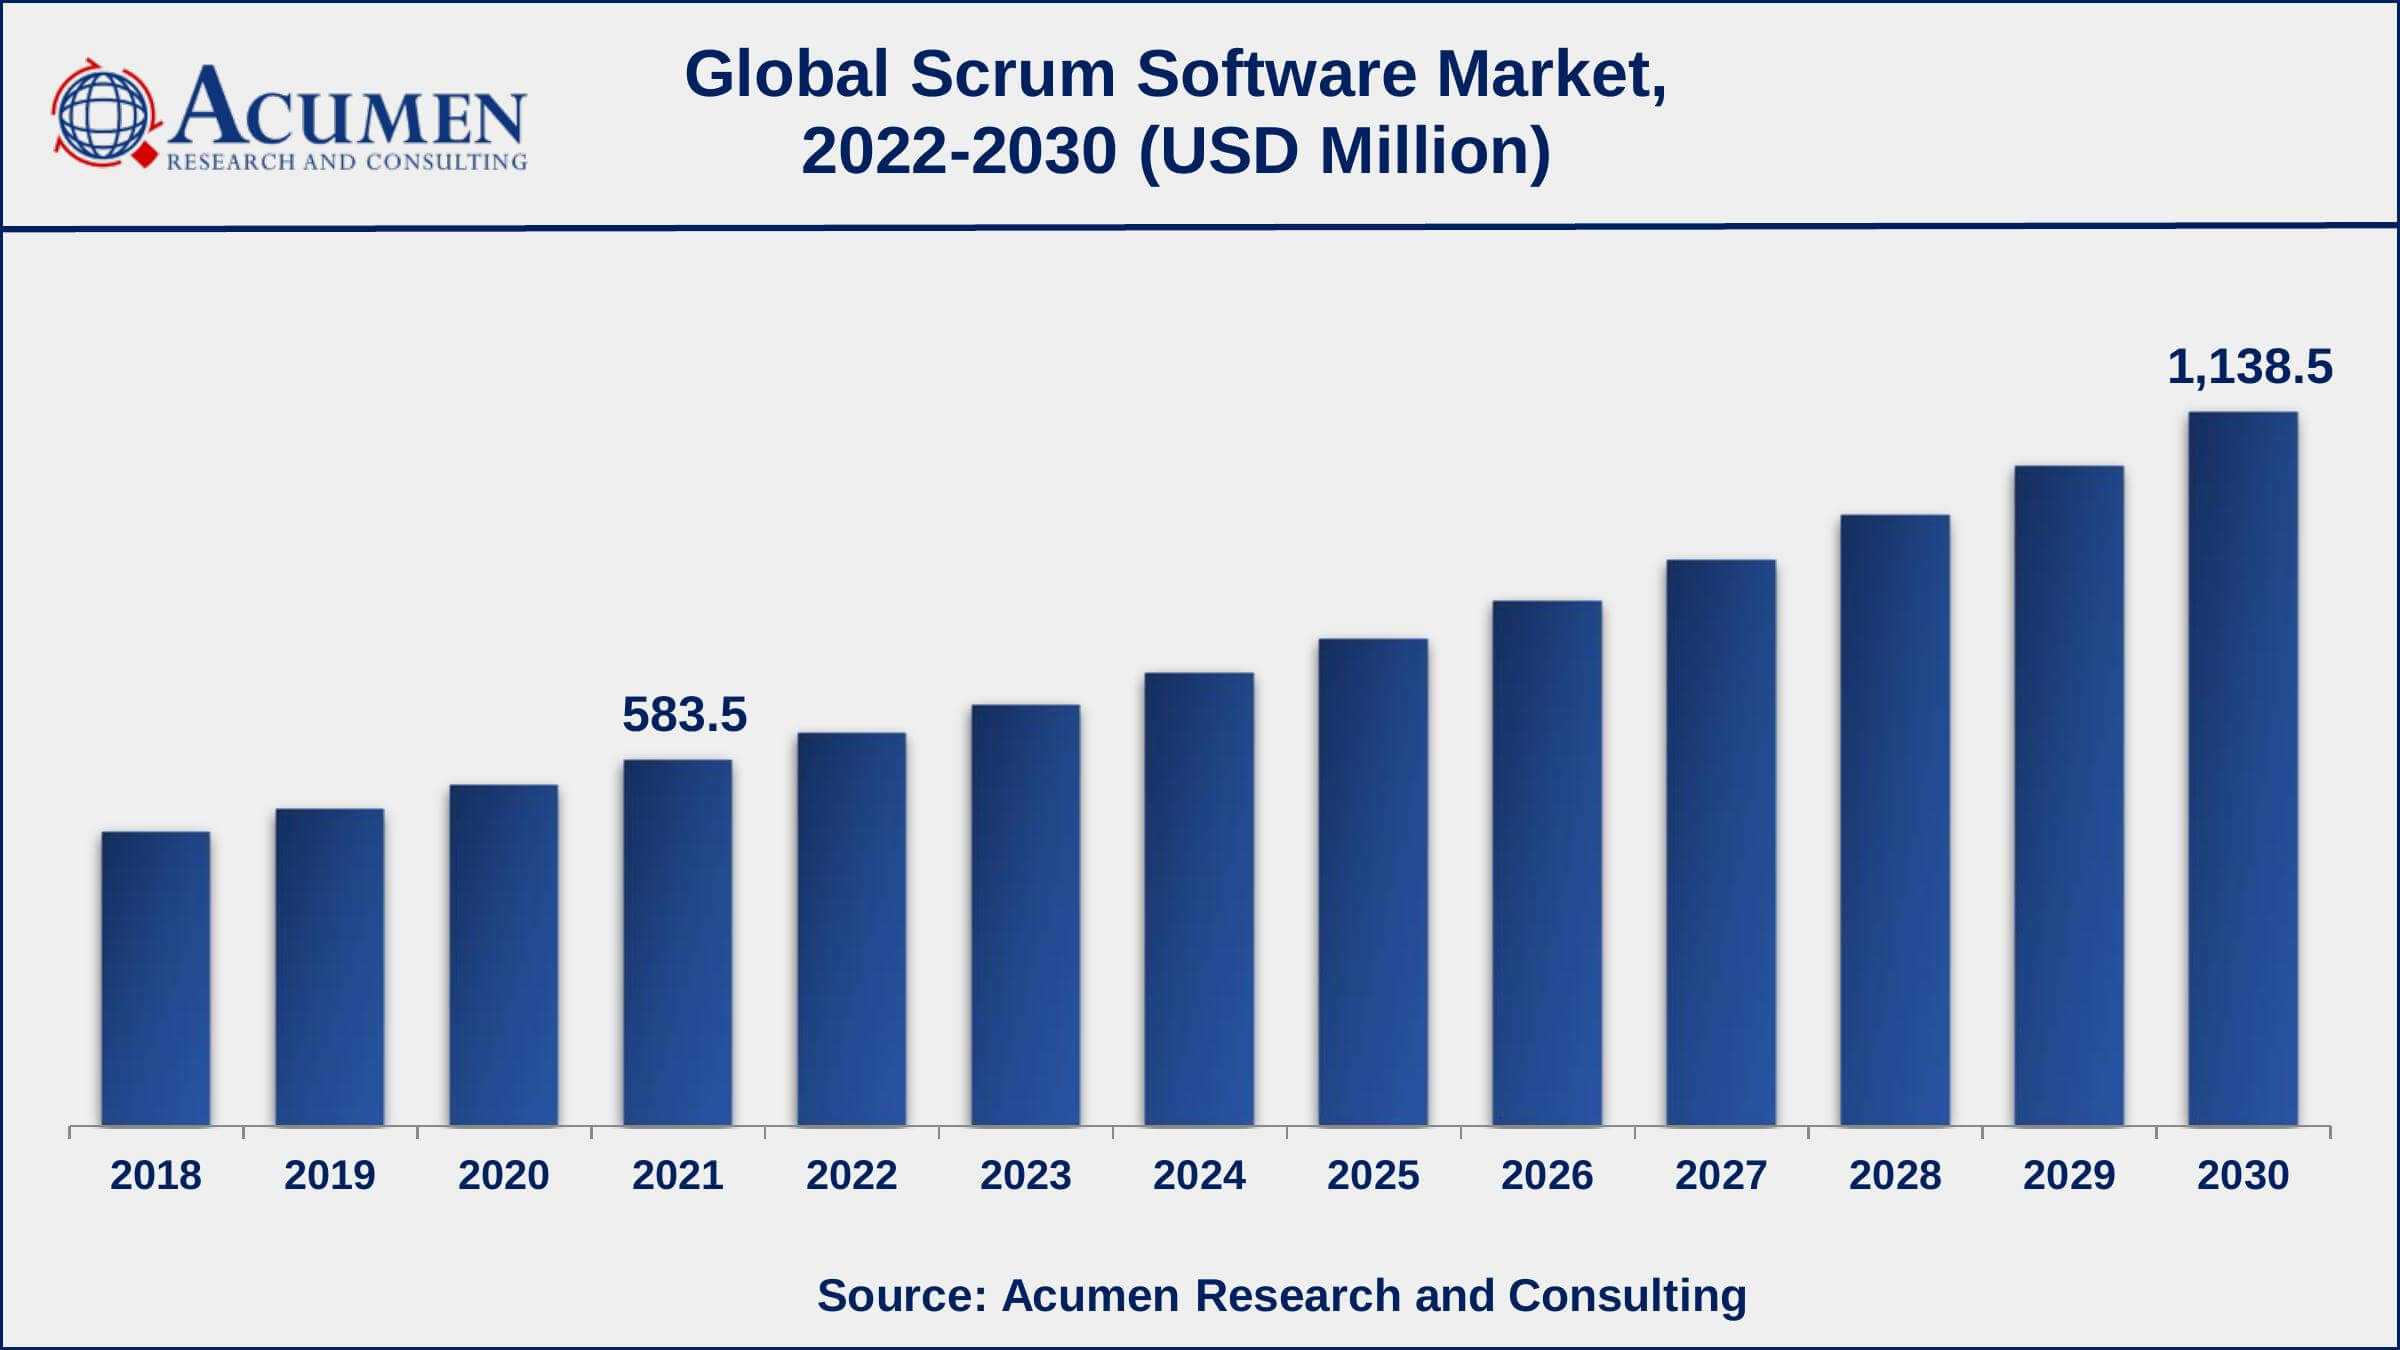 Asia-Pacific scrum software market growth will record a CAGR of around 9% from 2022 to 2030